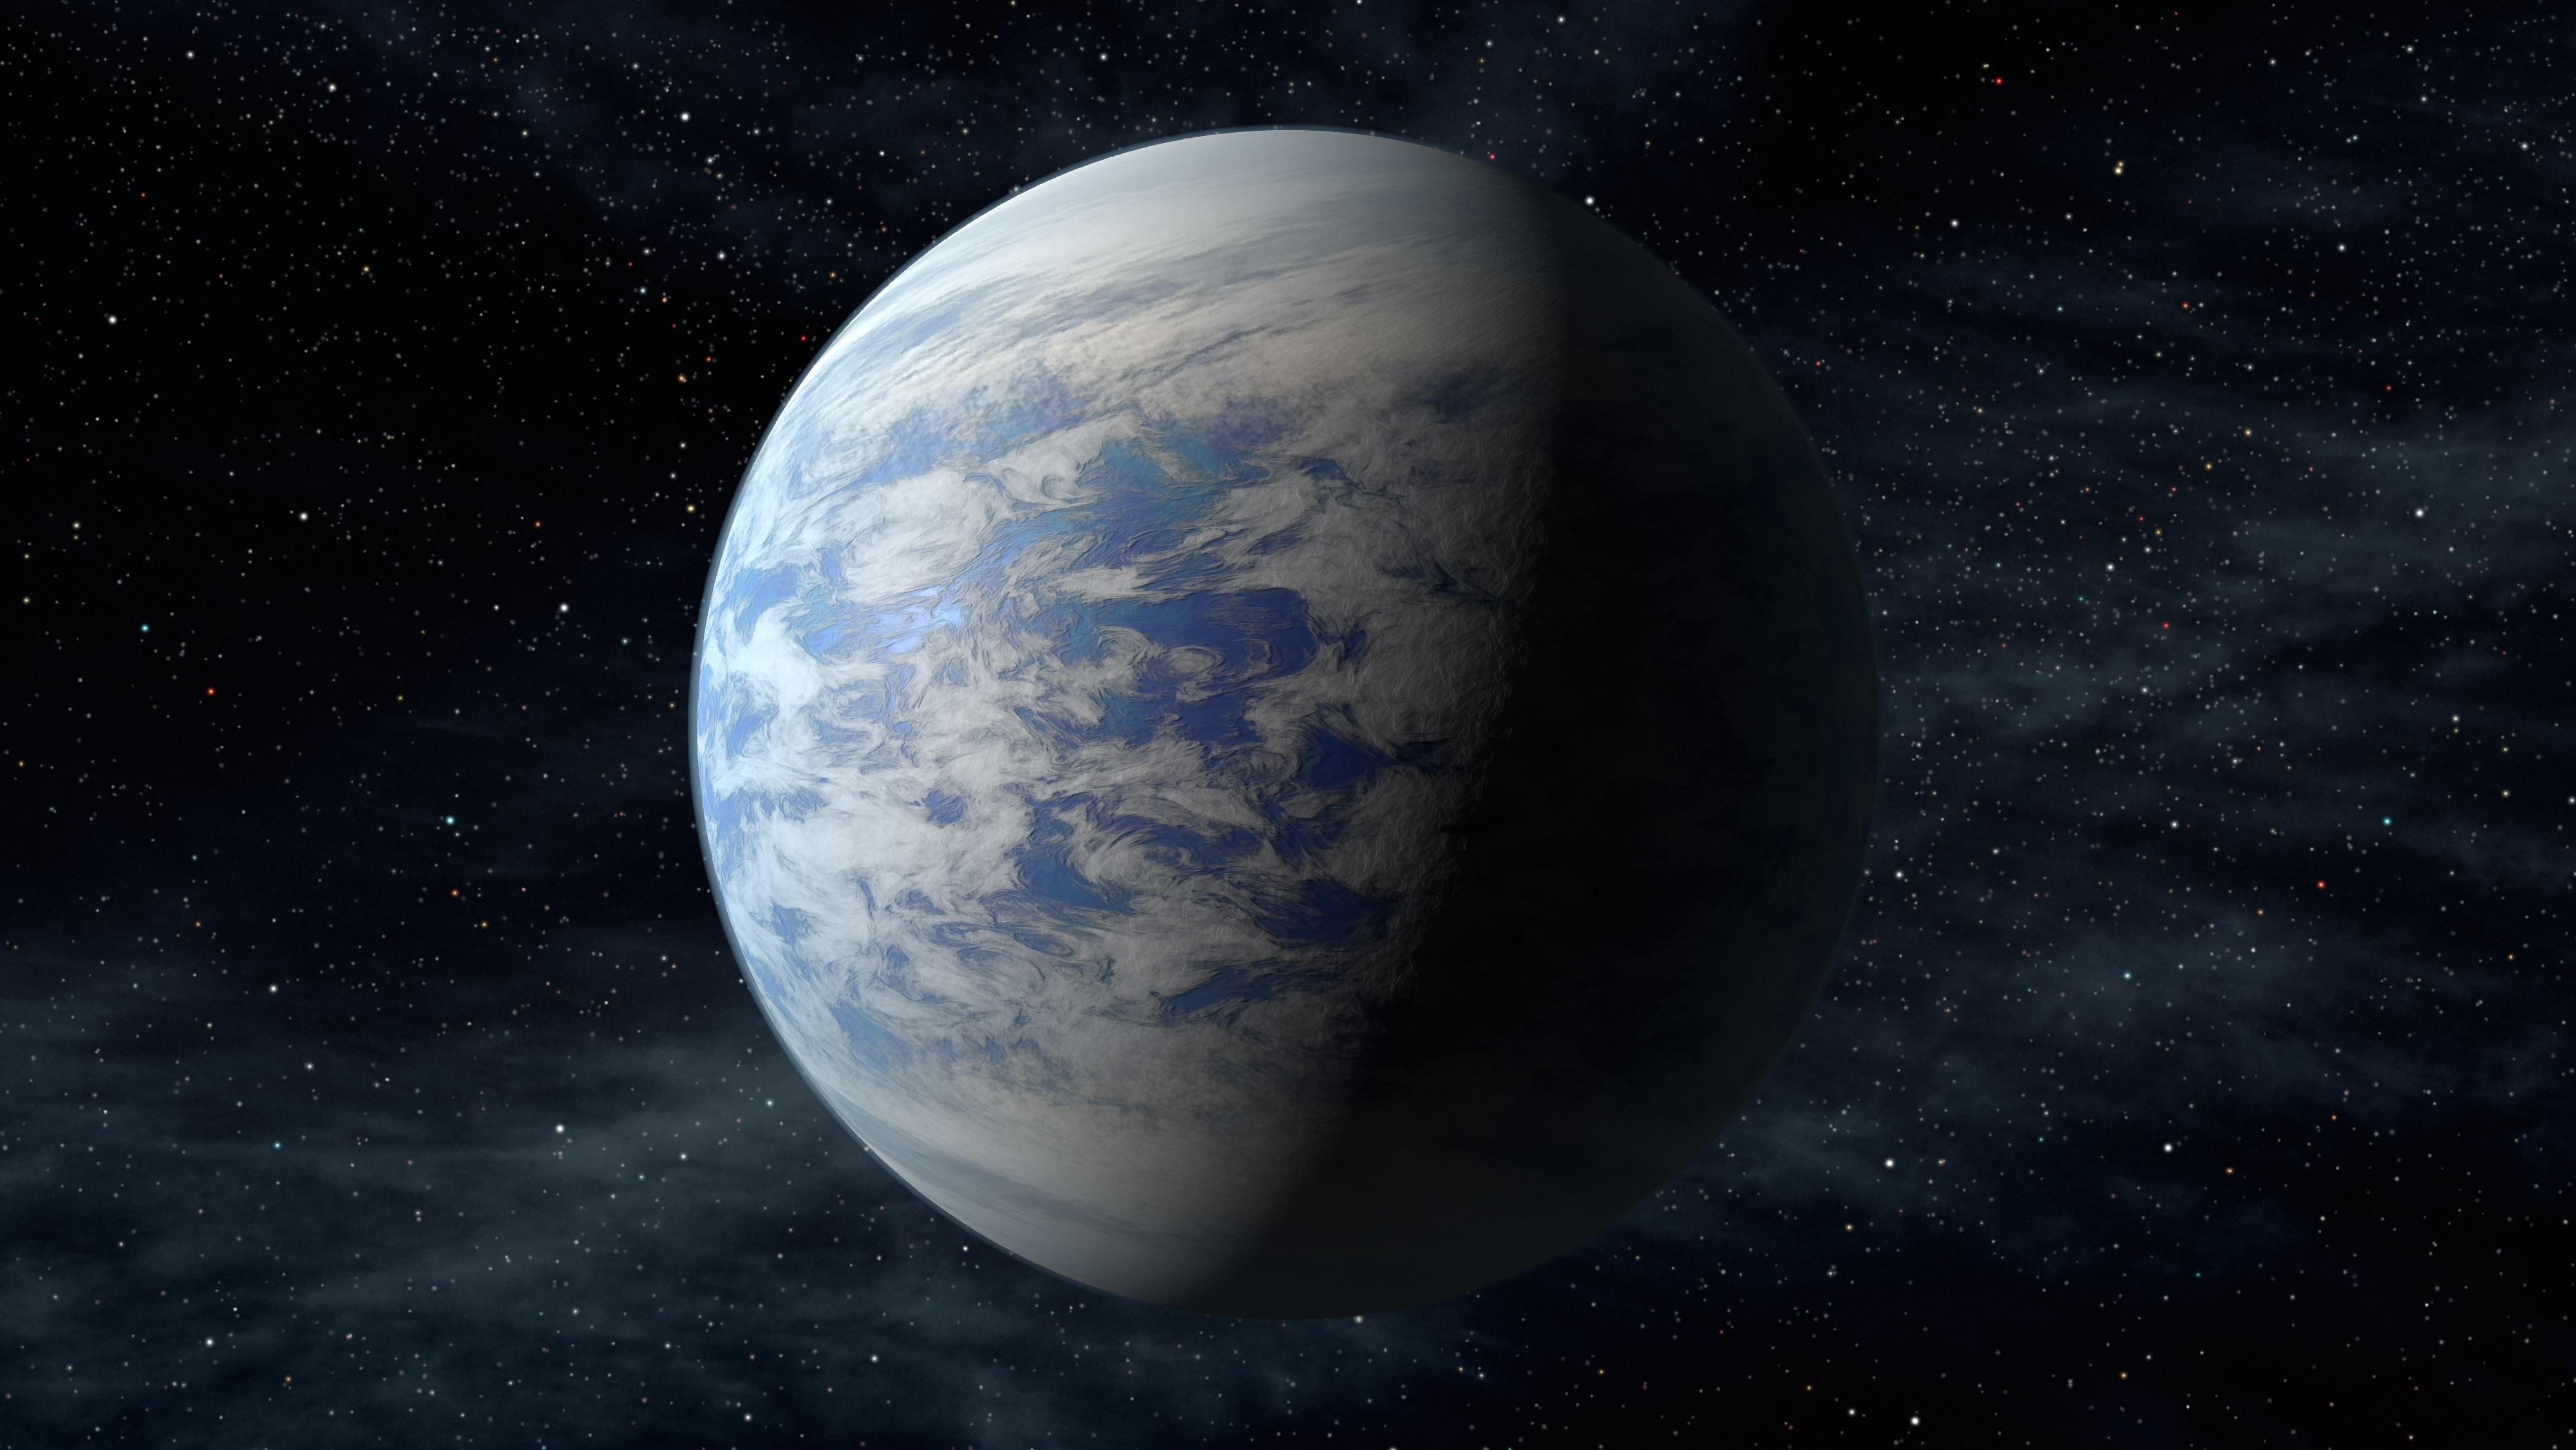 An artist's illustration of a super-Earth with liquid water and white clouds.